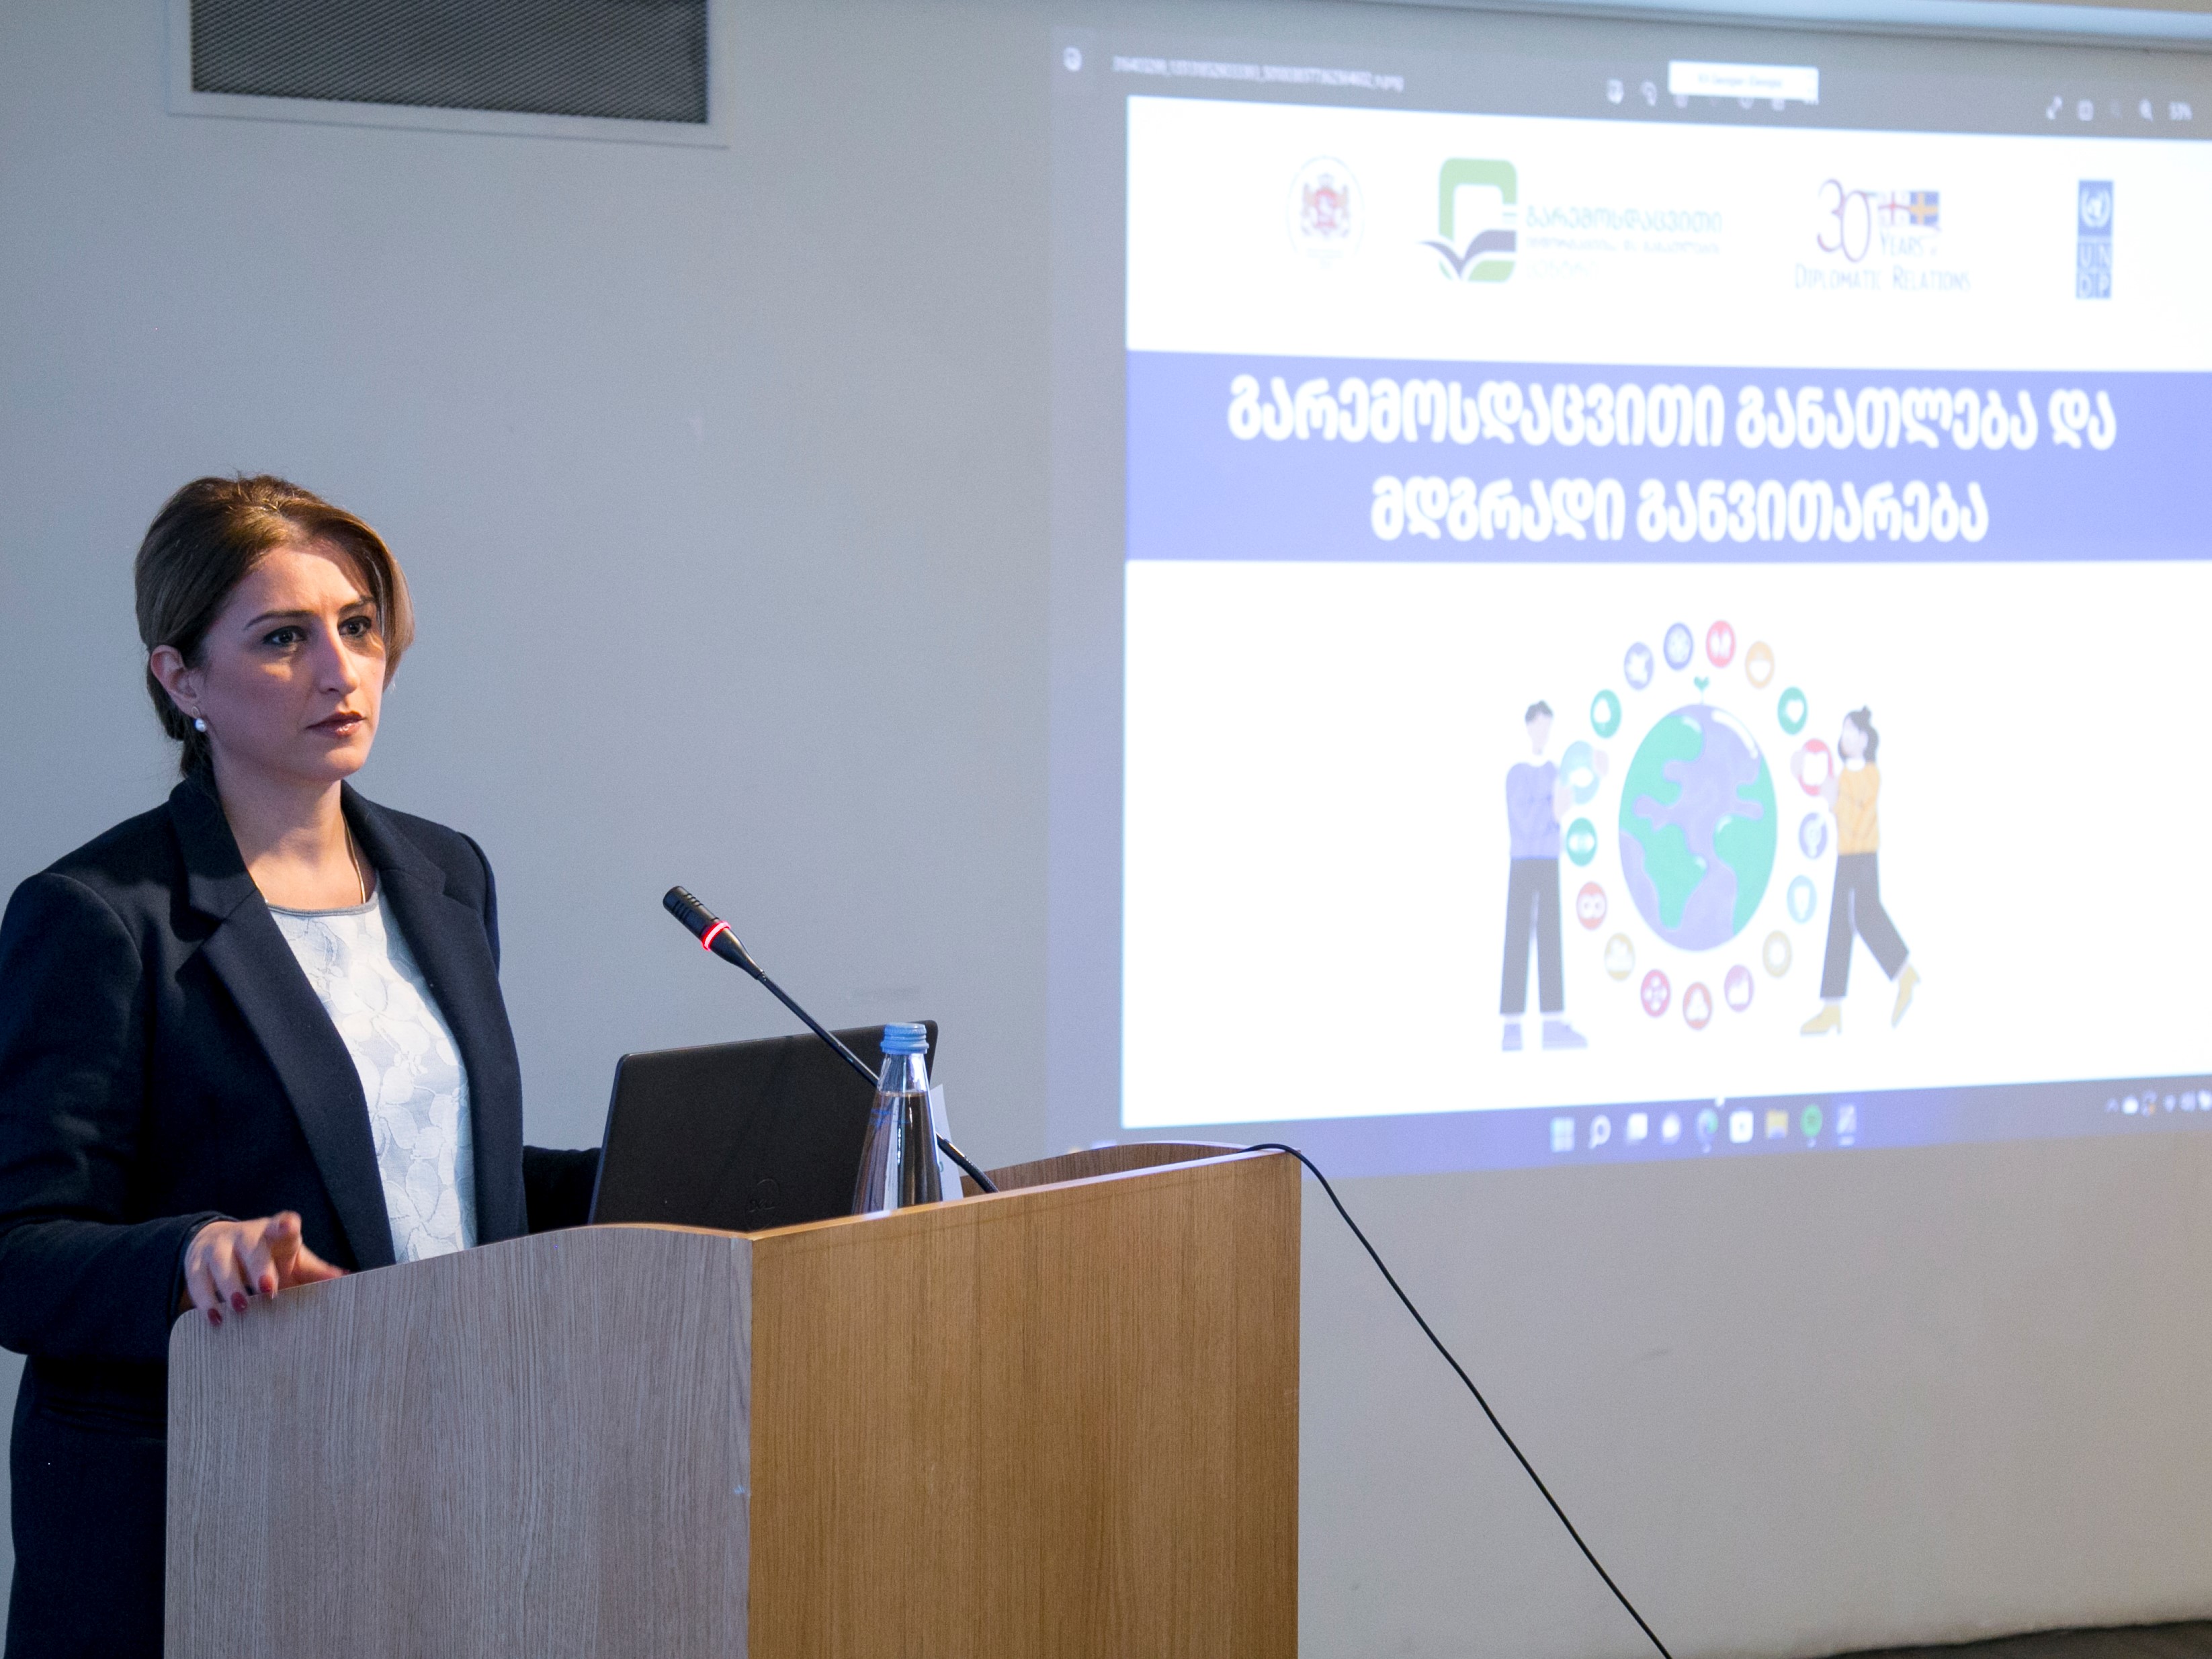 The conference "Environmental education and sustainable development" was held